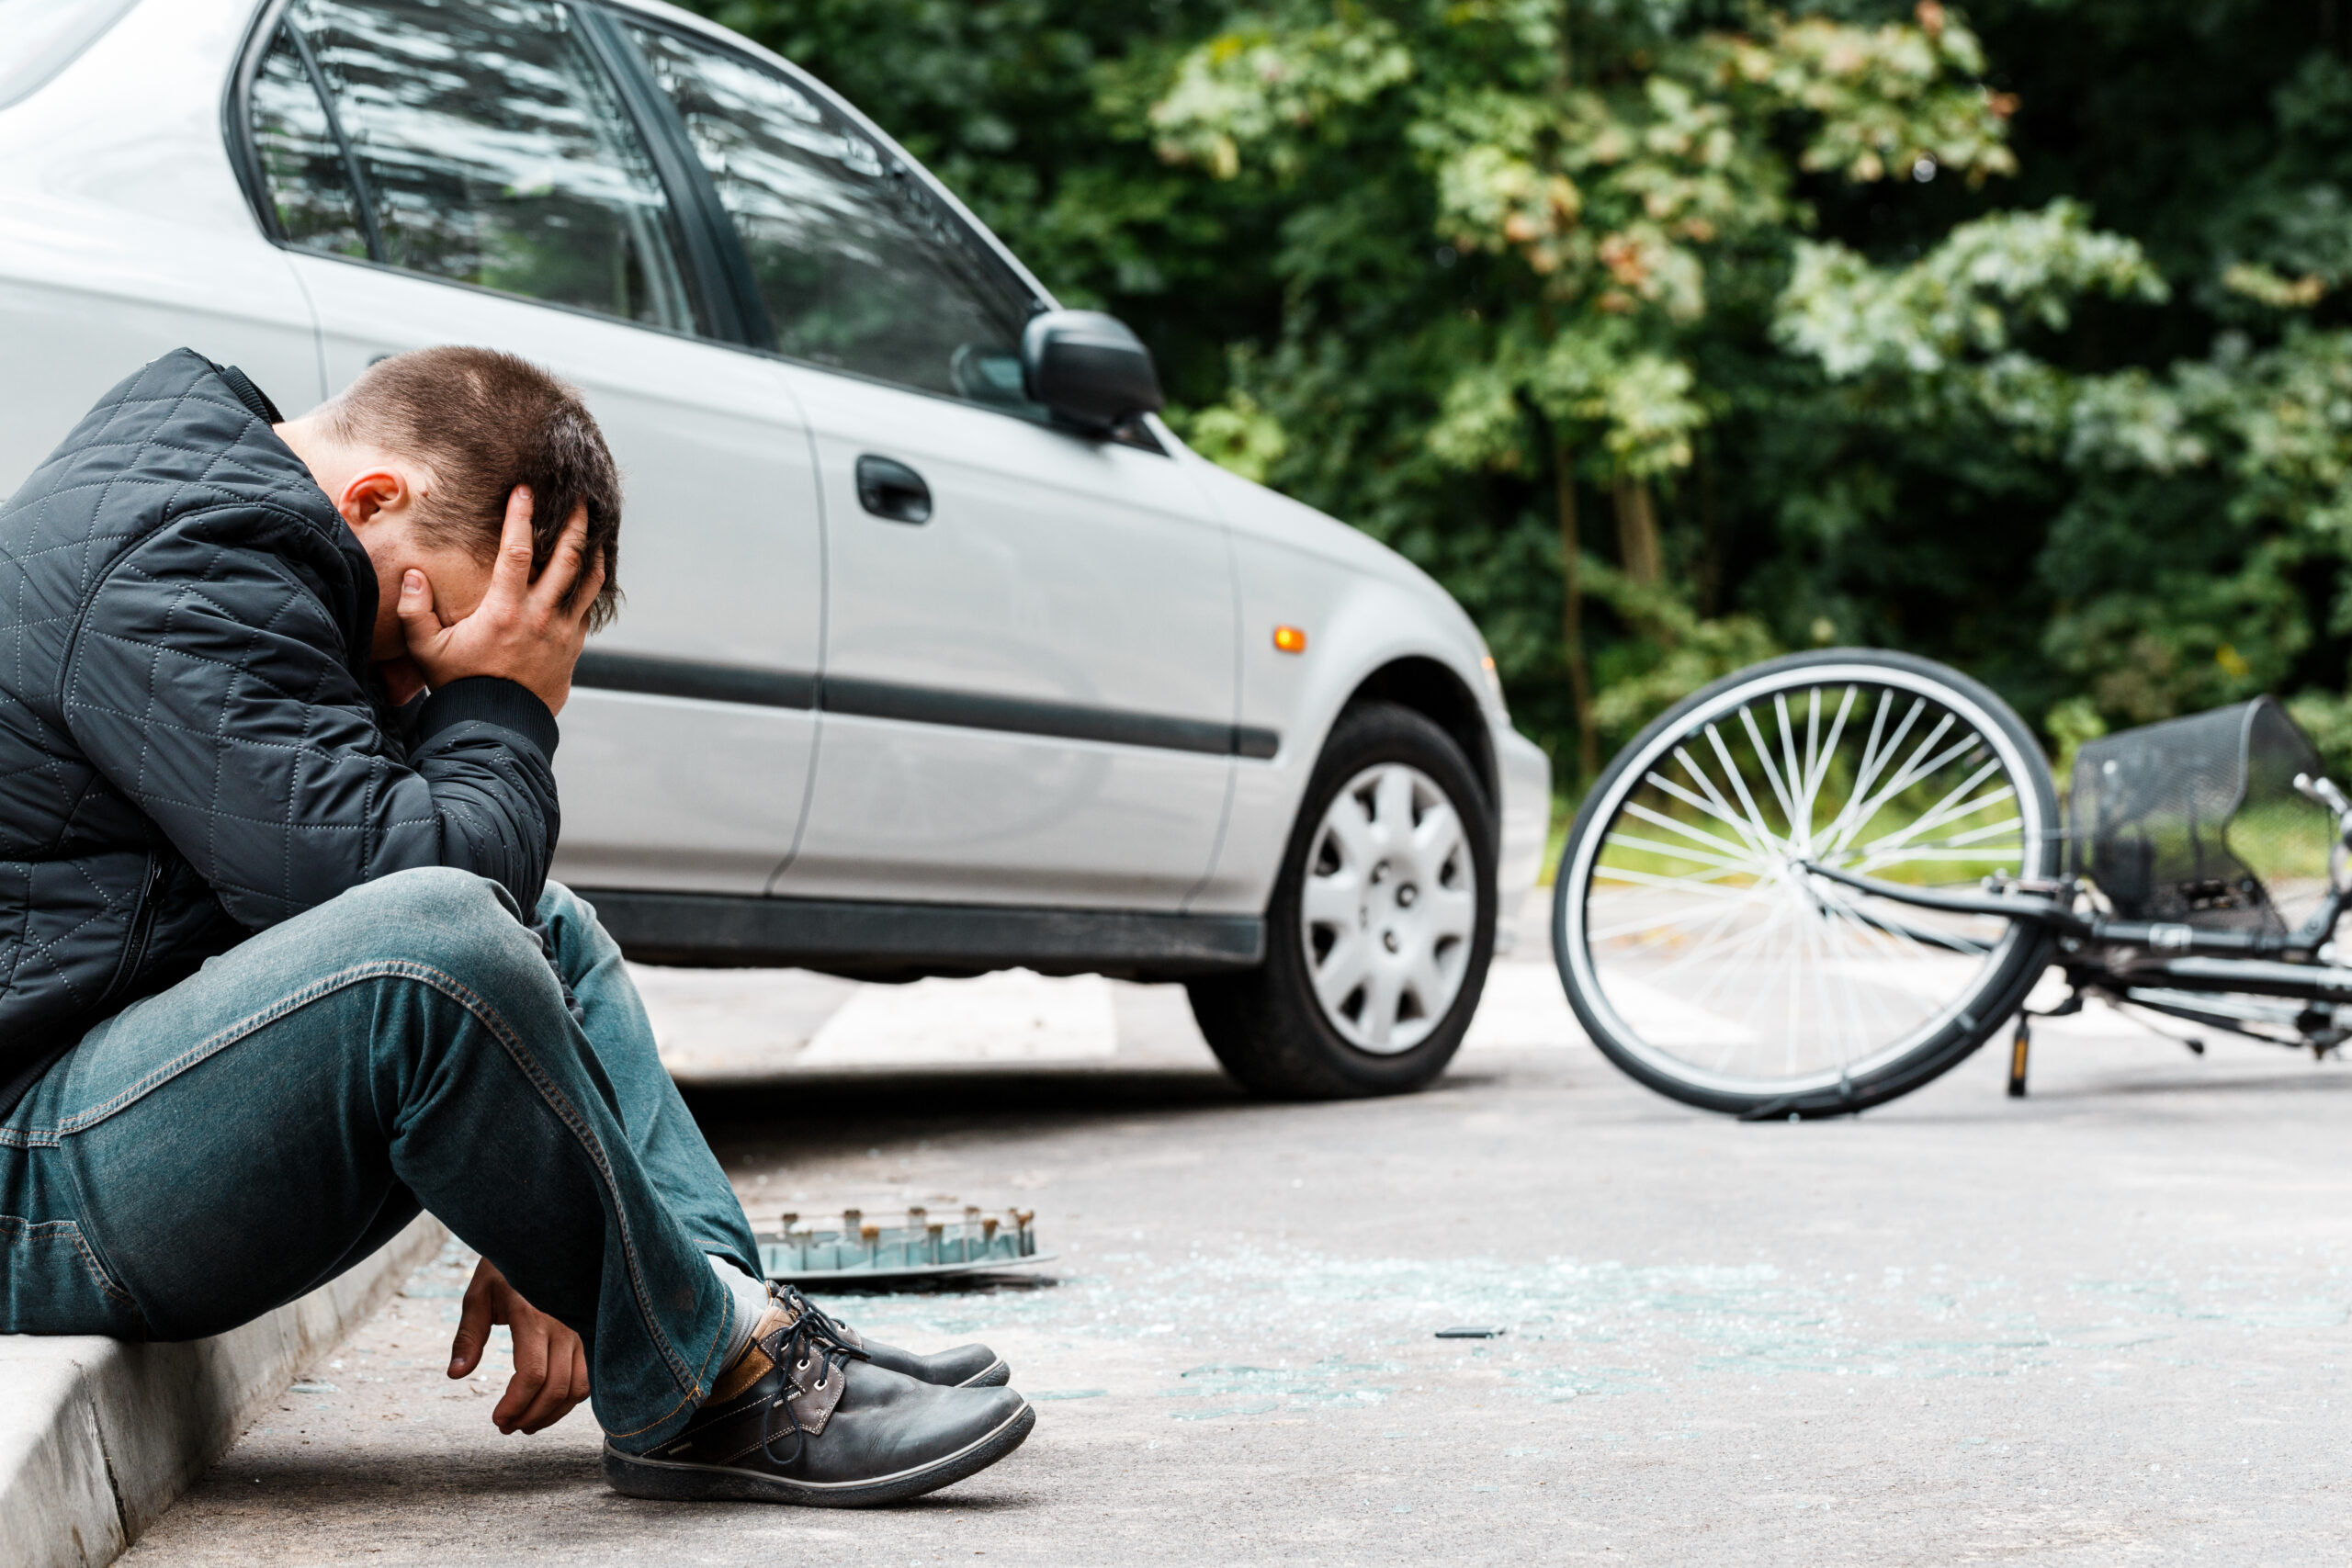 How to gather evidence after a bicycle accident in Florida?